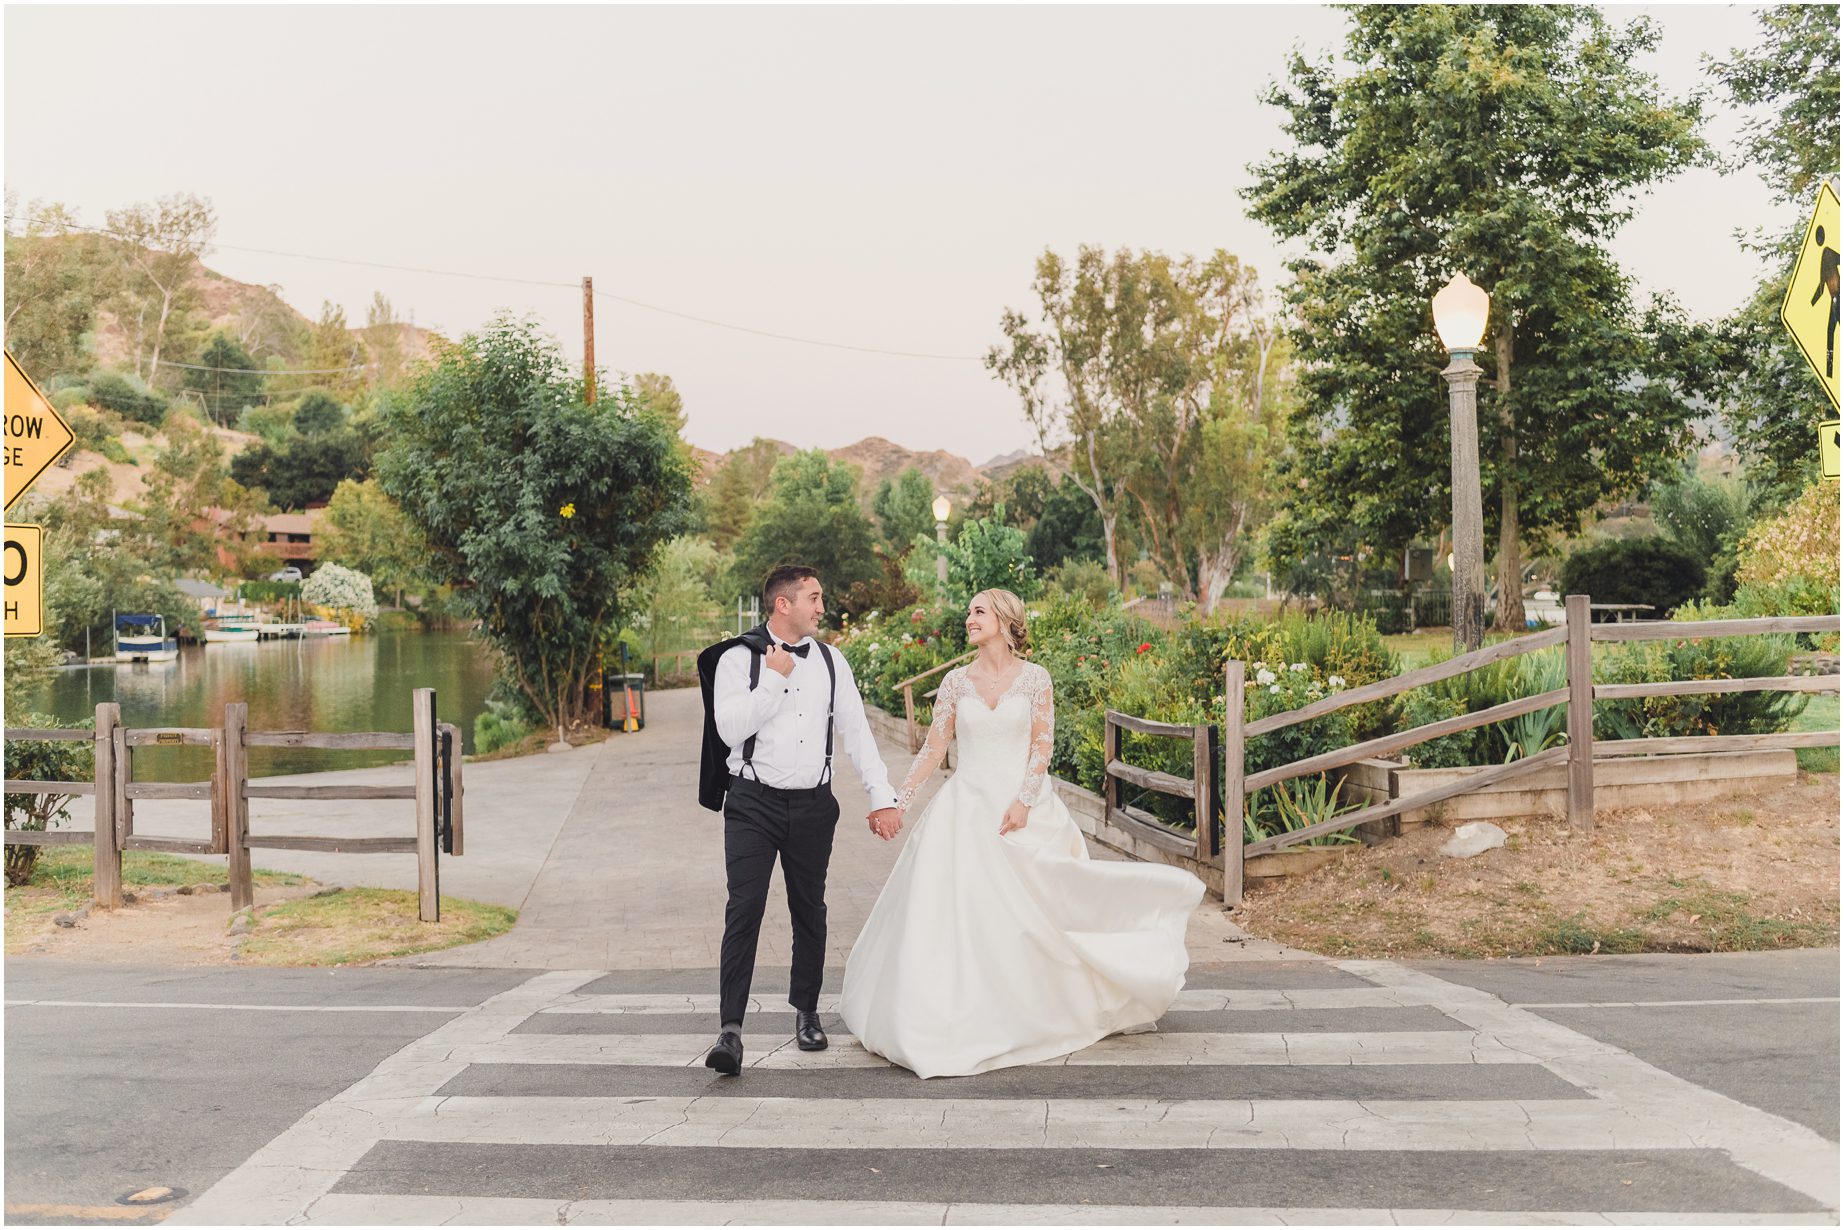 The bride and groom cross the street at the Lodge at Malibou Lake near the lake. They are smiling at each other and the streetlights have just come on because the sun is setting